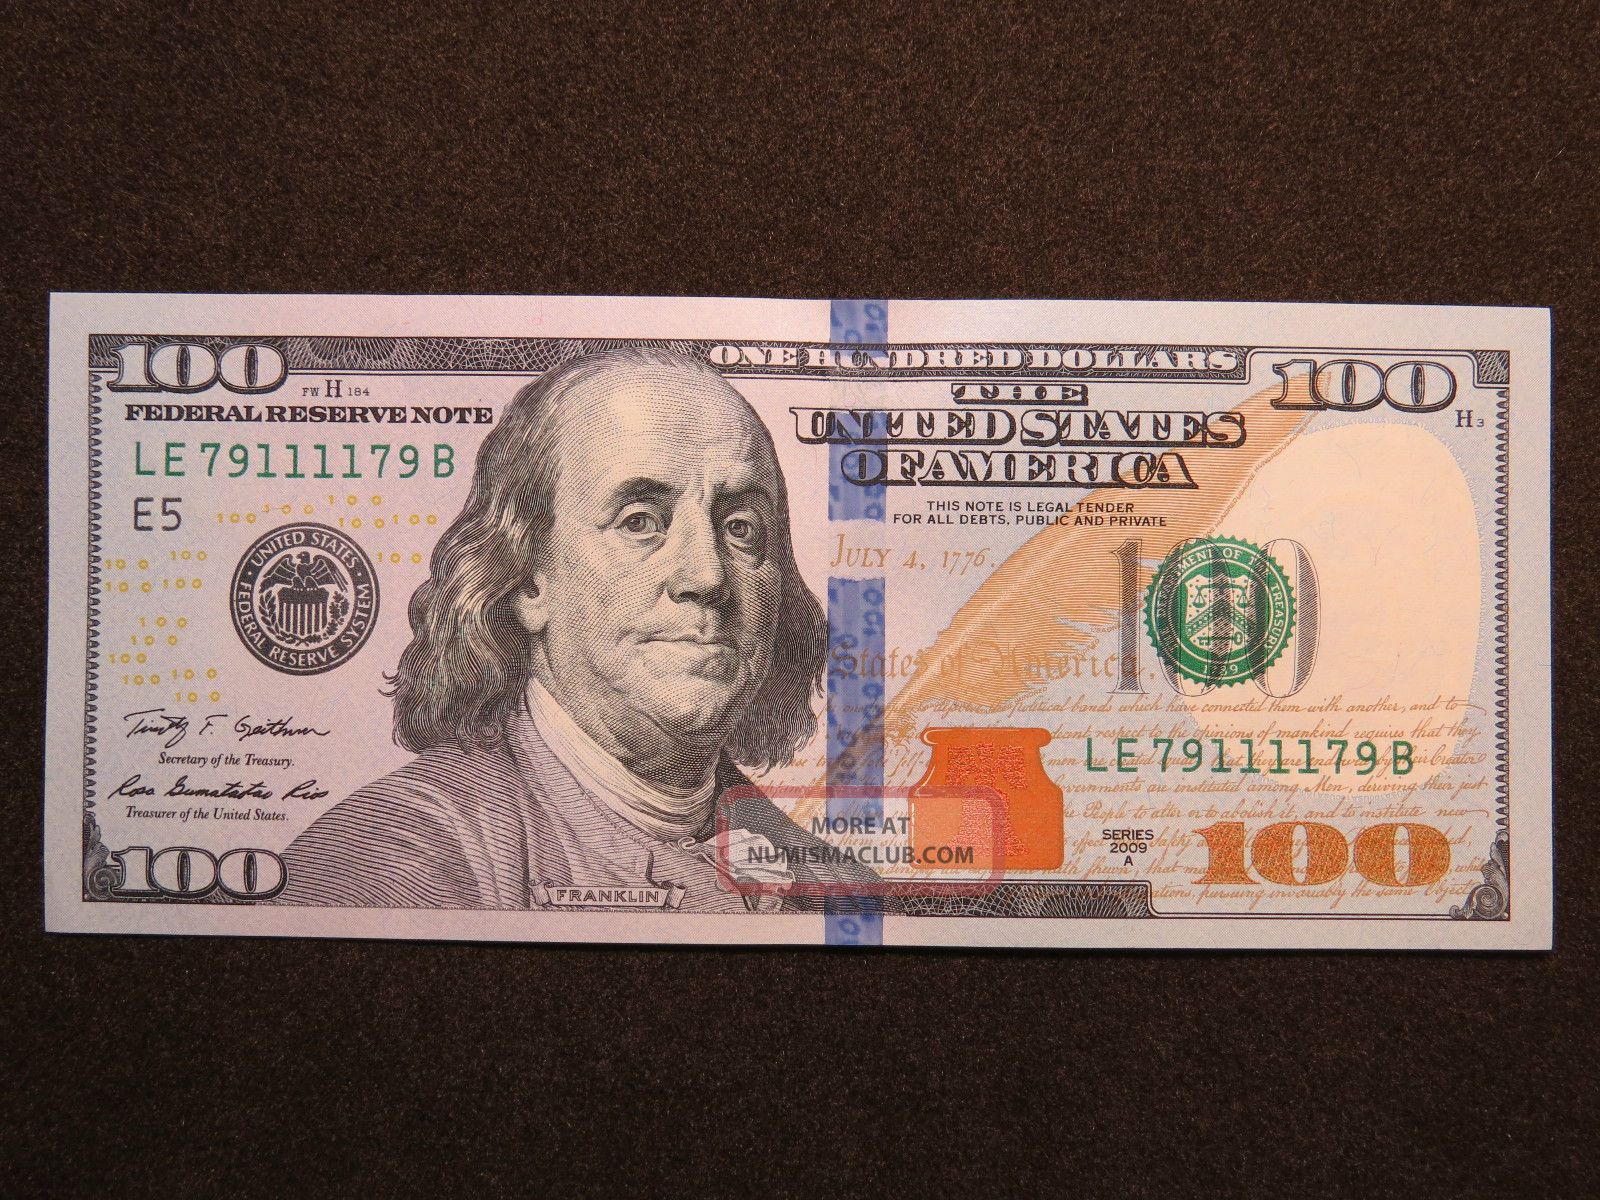 2009a $100 Us Dollar Bank Note Le79111179b Bookend Bill United States Unc Small Size Notes photo